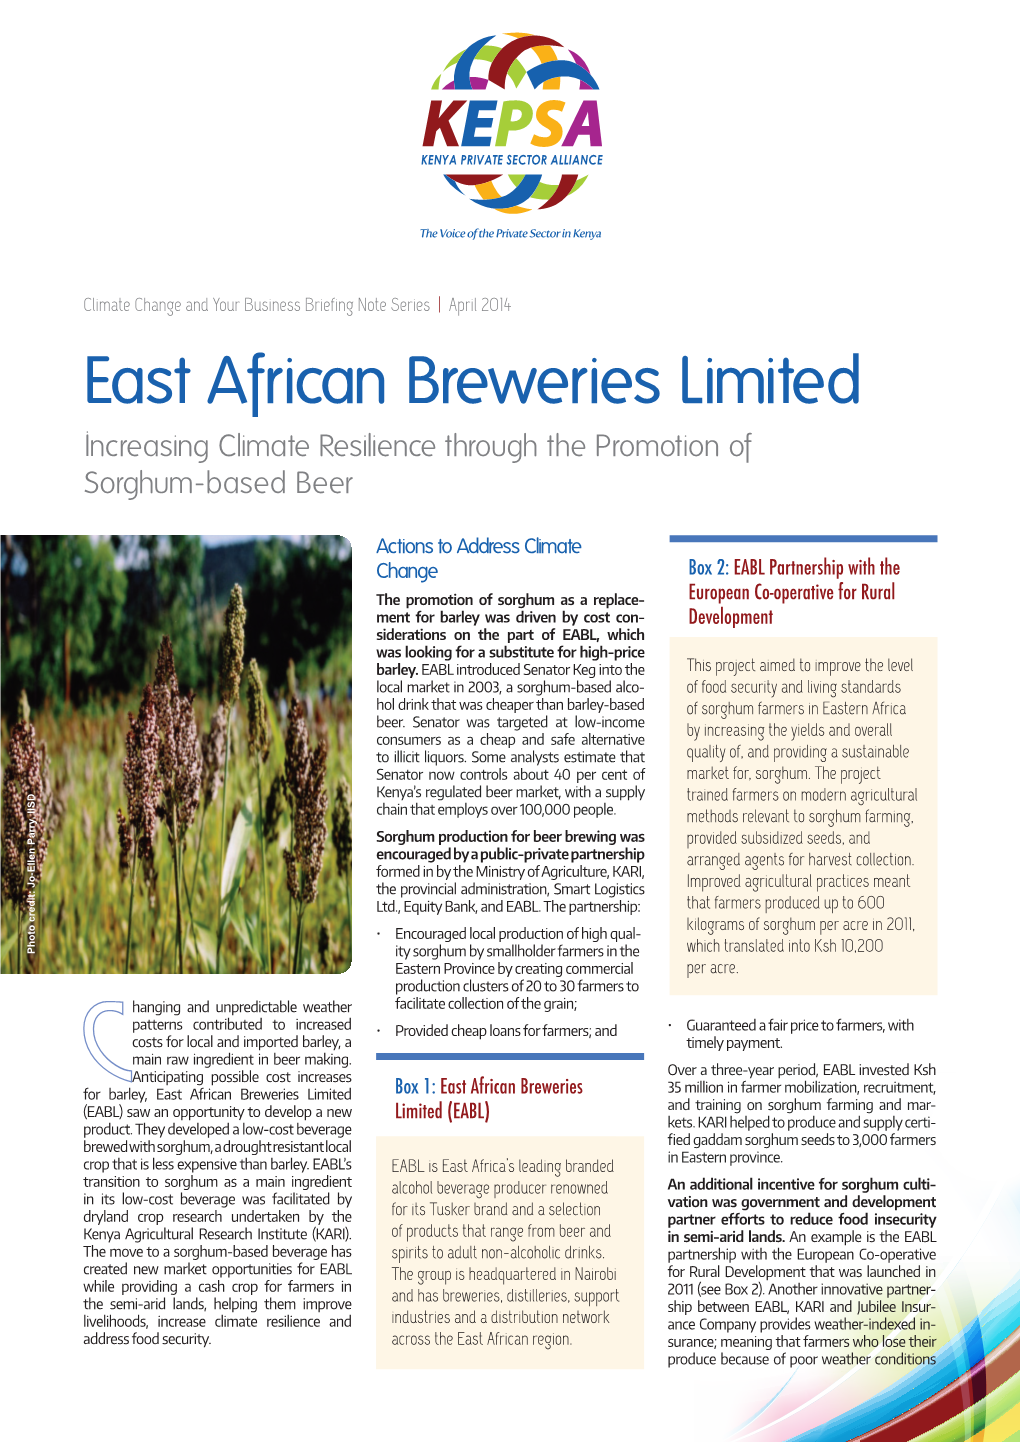 East African Breweries Limited Increasing Climate Resilience Through the Promotion of Sorghum-Based Beer